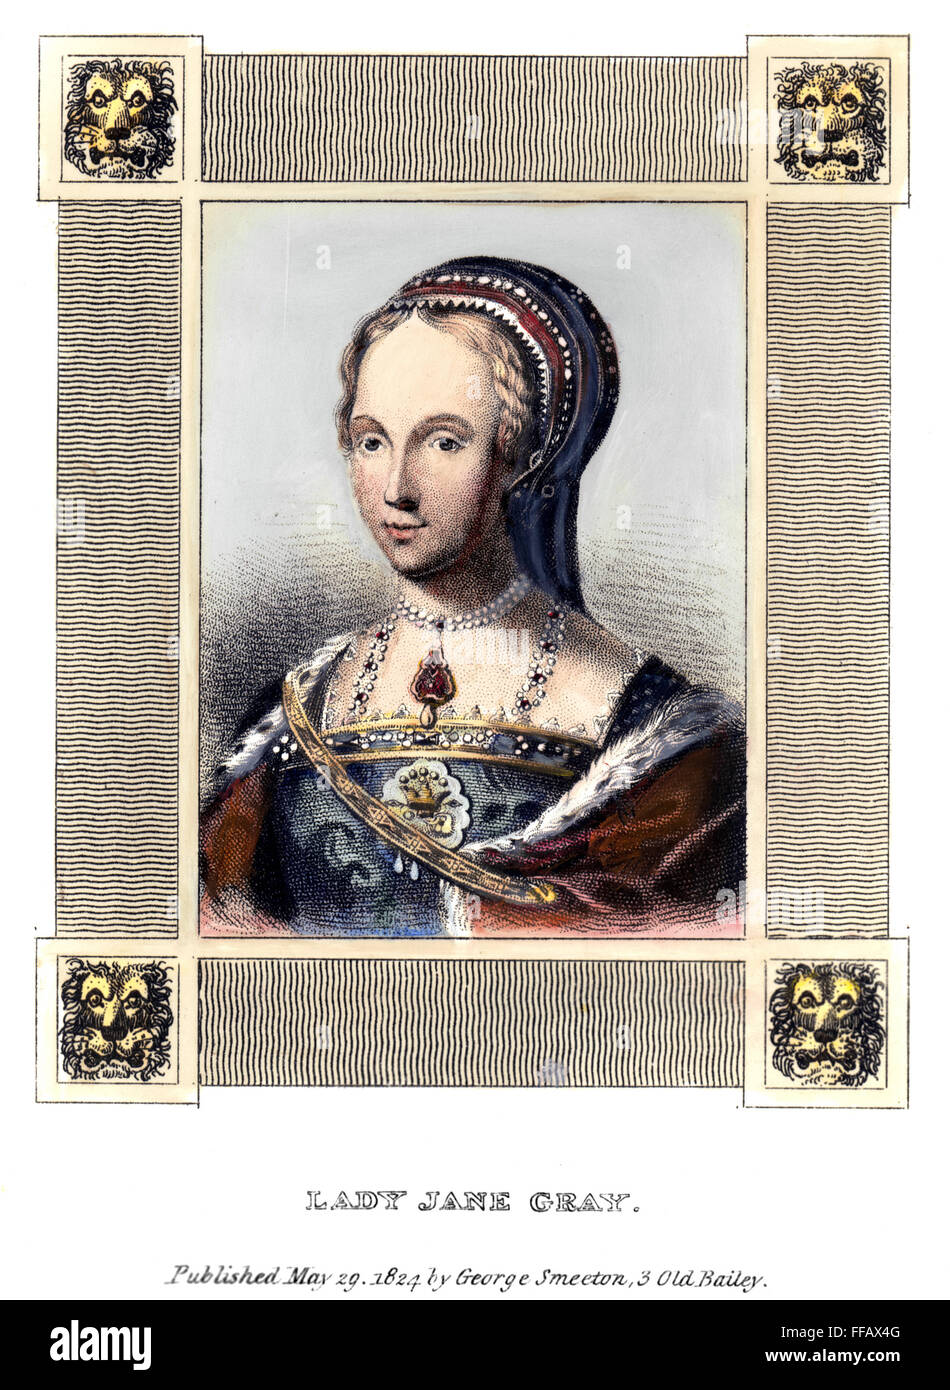 LADY JANE GREY (1537-1554). /nQueen of England, 9 July - 18 July 1553. Line-and-stipple engraving, English, 1824. Stock Photo